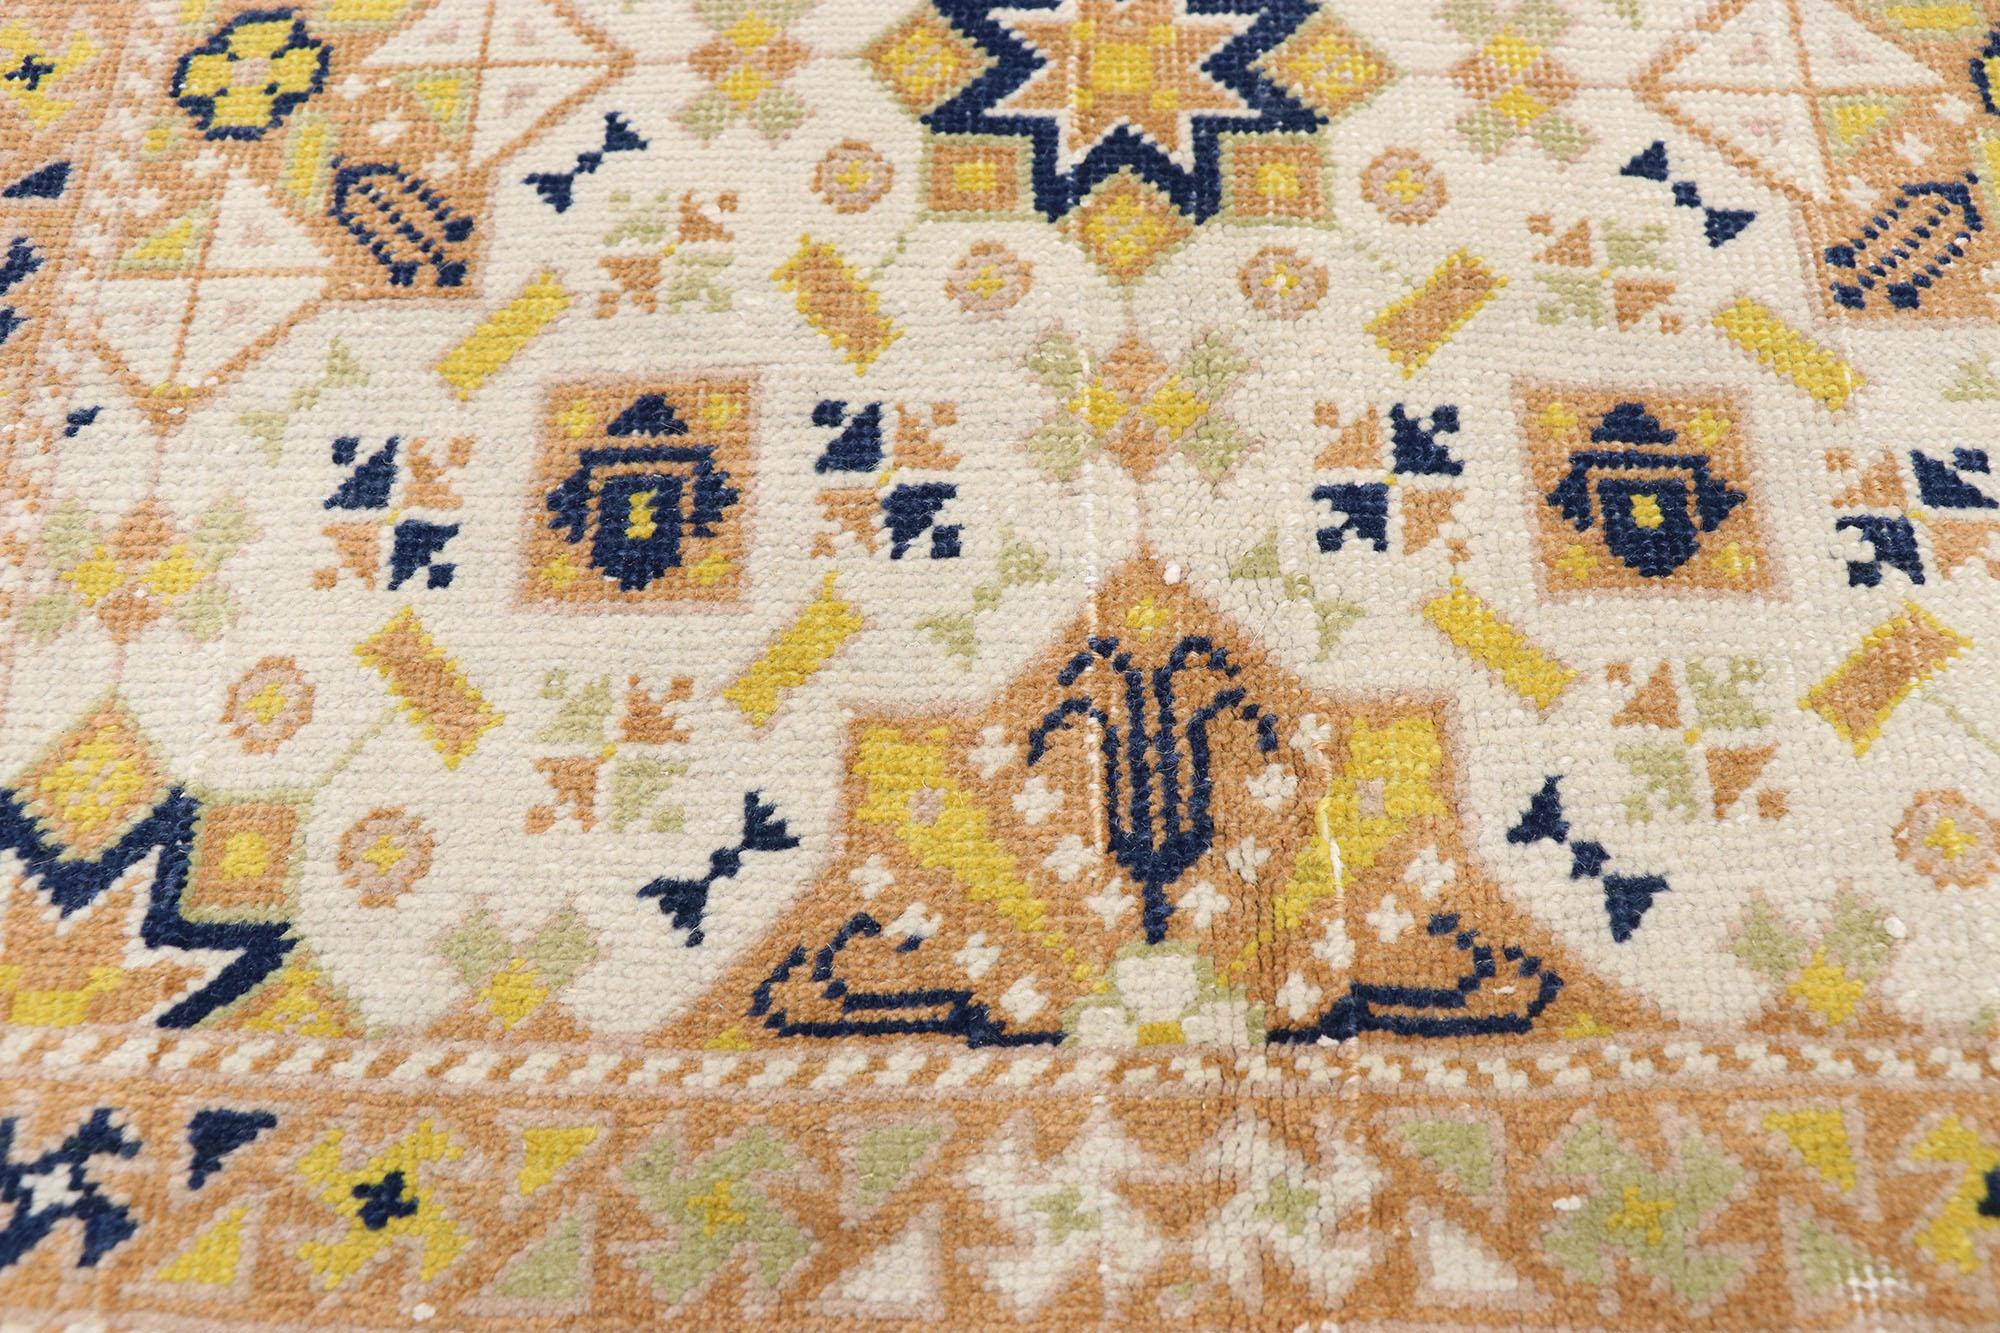 Vintage Turkish Sivas Rug with Geometric Design and Islamic Tile Art Style In Good Condition For Sale In Dallas, TX